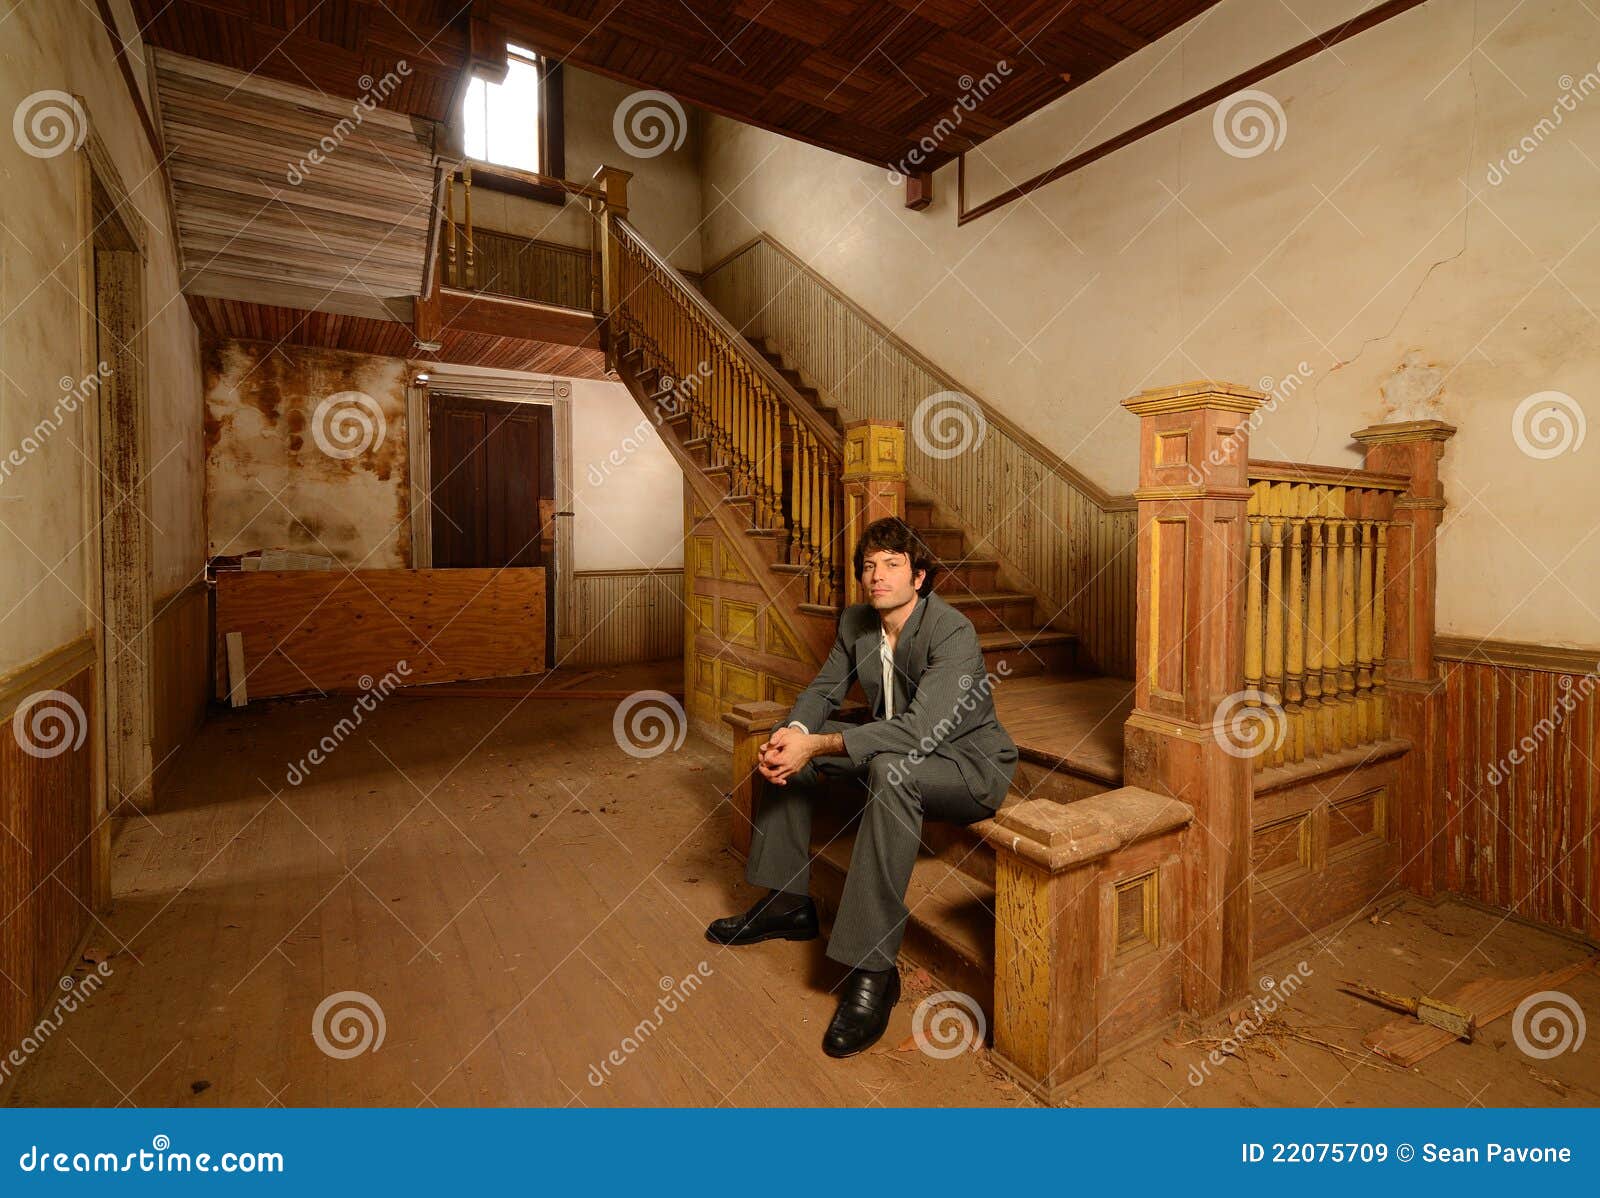 Man Sitting On Stairs In An Old House Stock Image - Image 